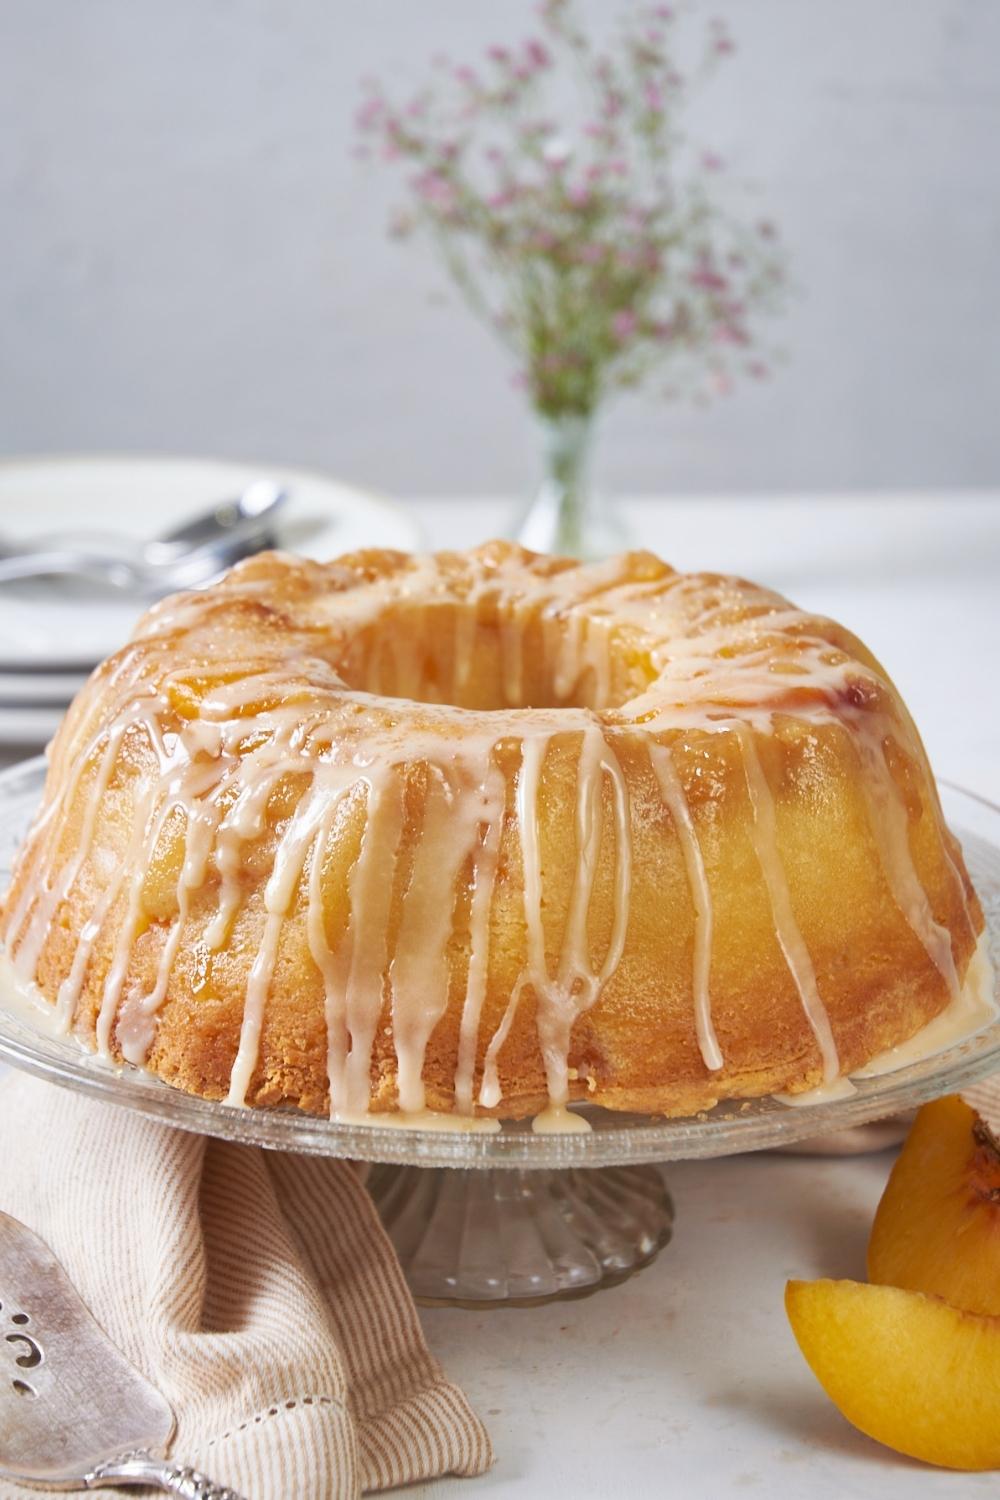 A peach cobbler bundt cake drizzled with glaze on a cake stand.